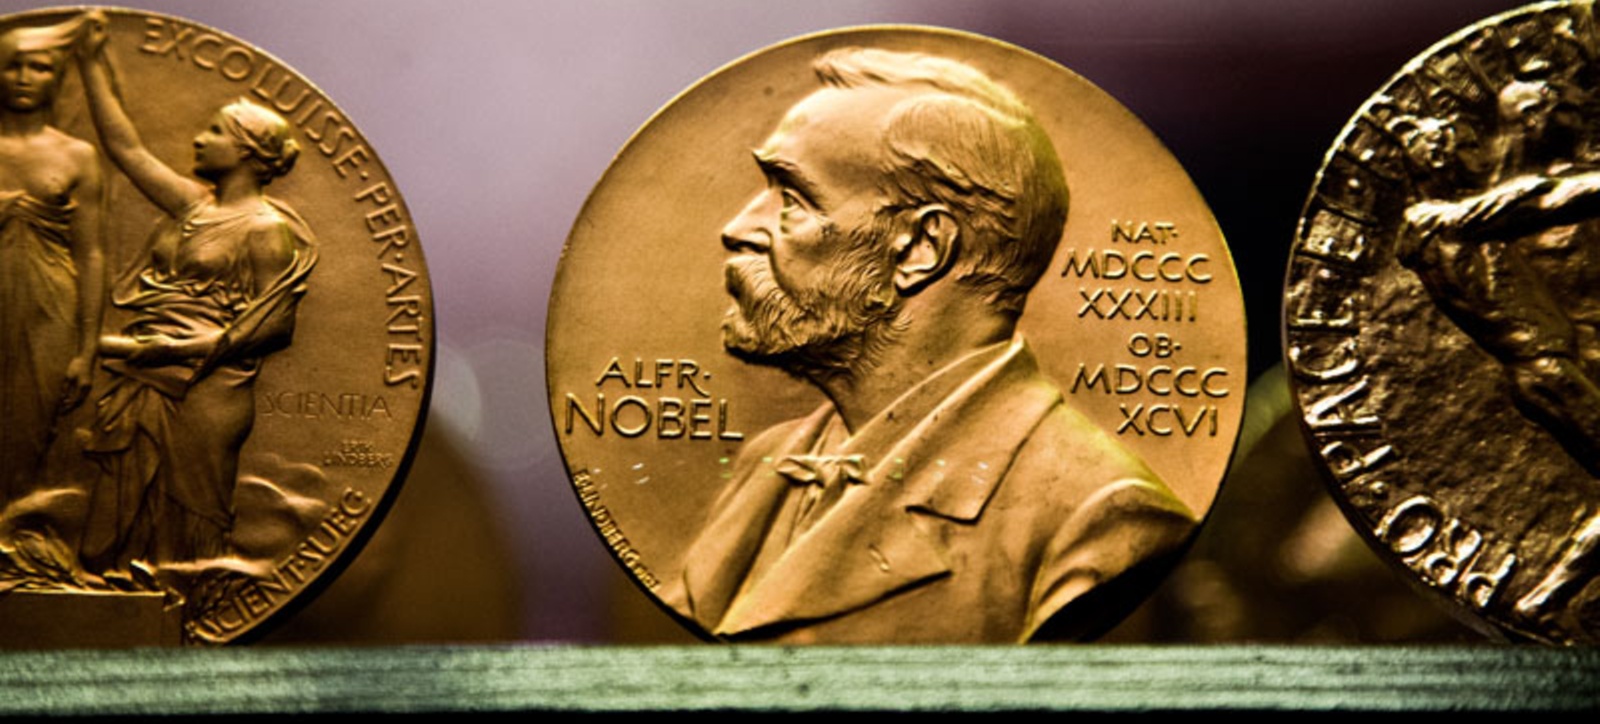 The Nobel Prize motto: 'For the greatest benefit of mankind', stresses the importance of research with real-world impact